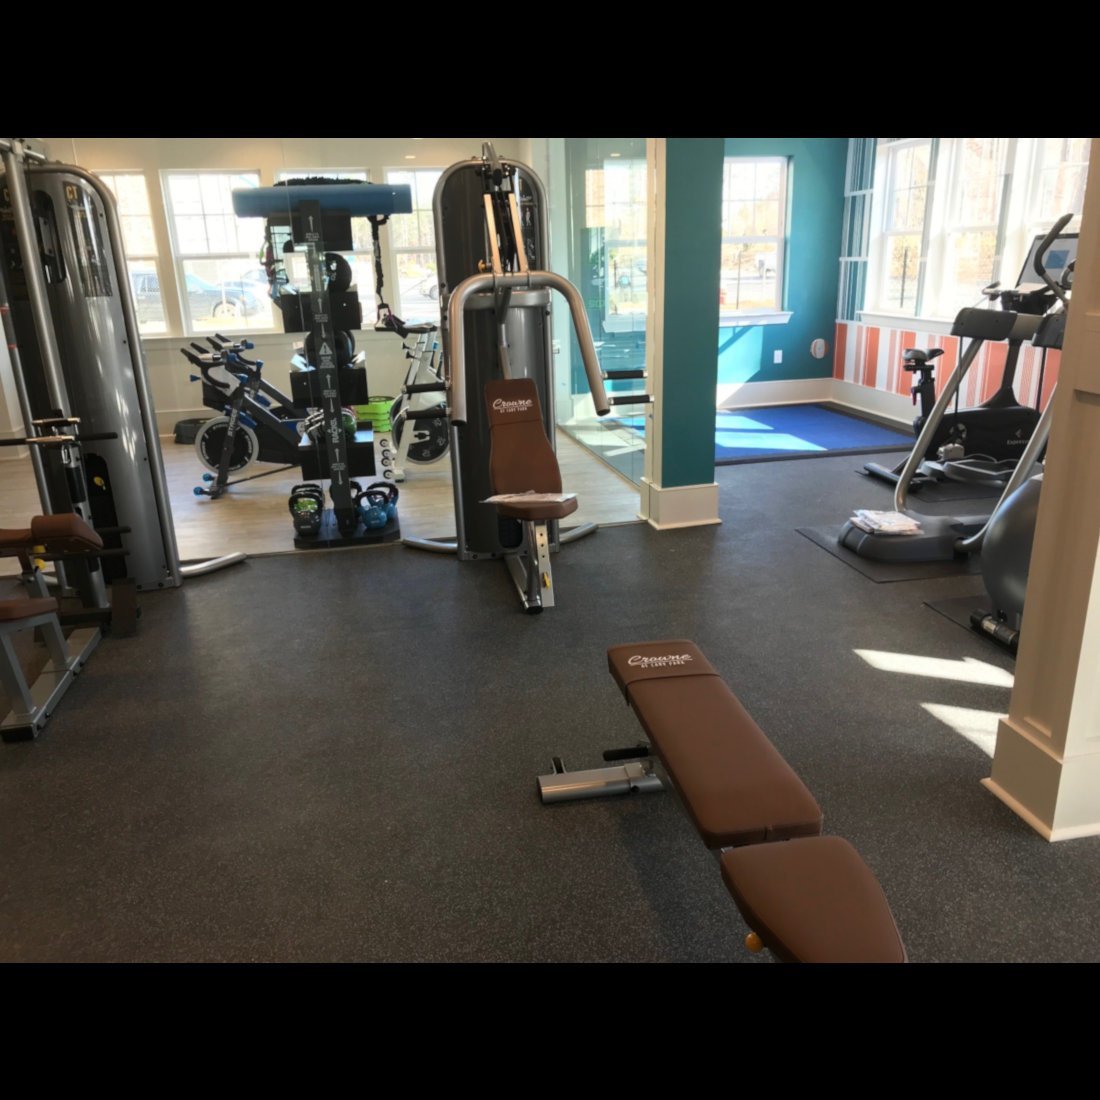 Inflight Fitness FID Adjustable Multi-Bench in a Gym Facility.